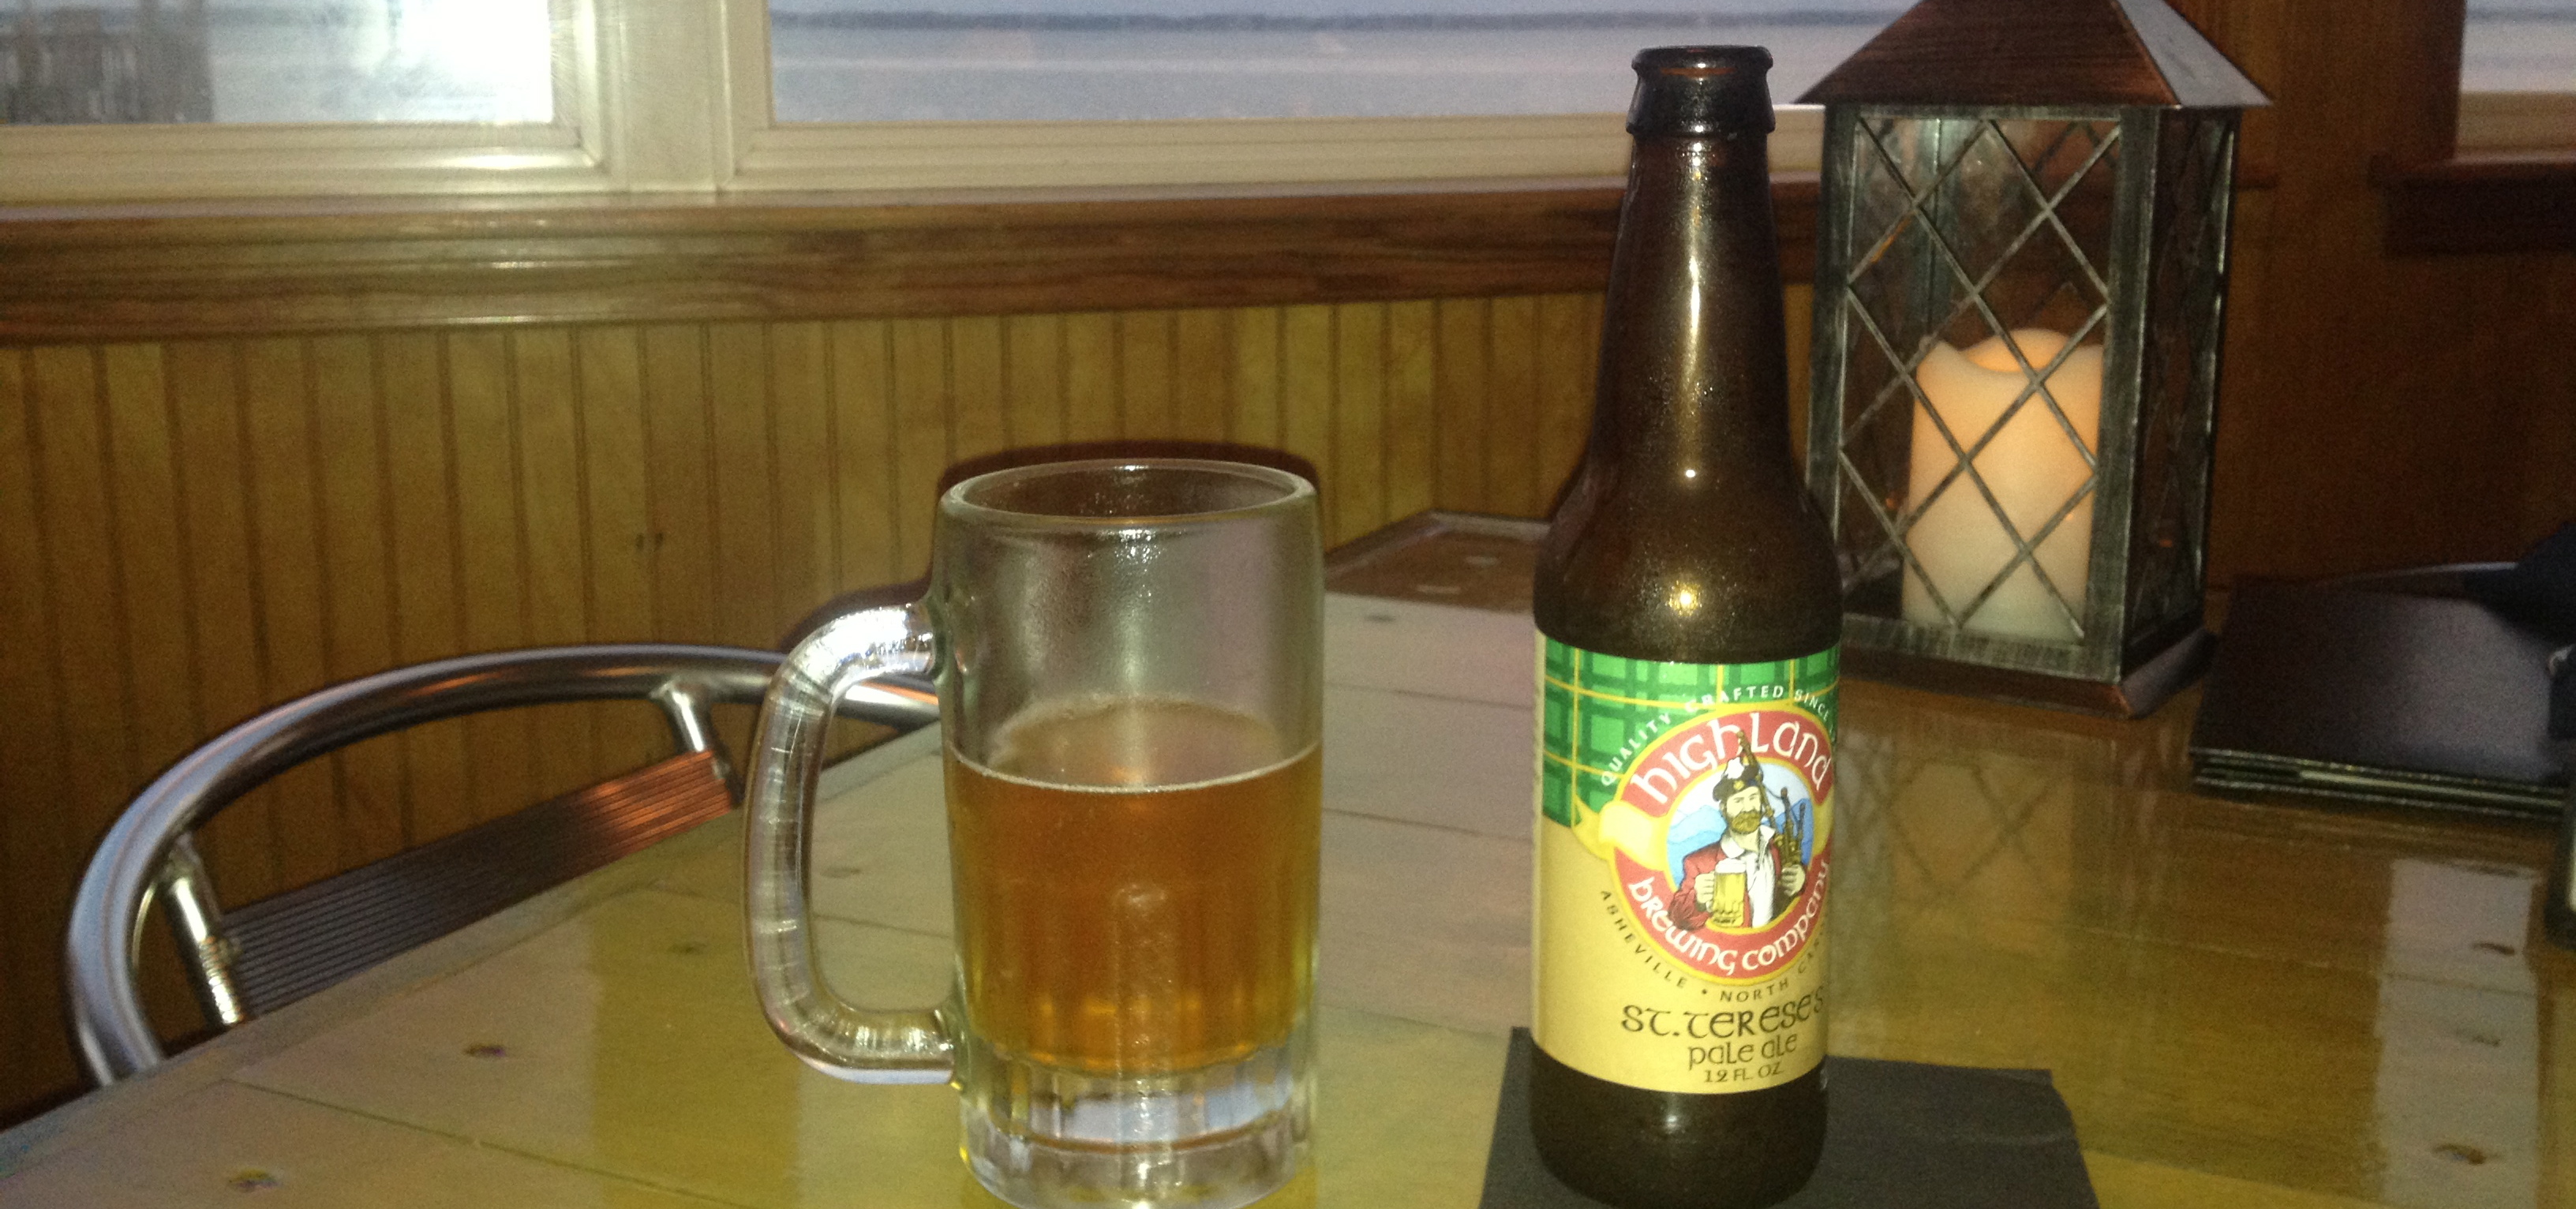 Highland Brewing Company — St. Terese’s Pale Ale